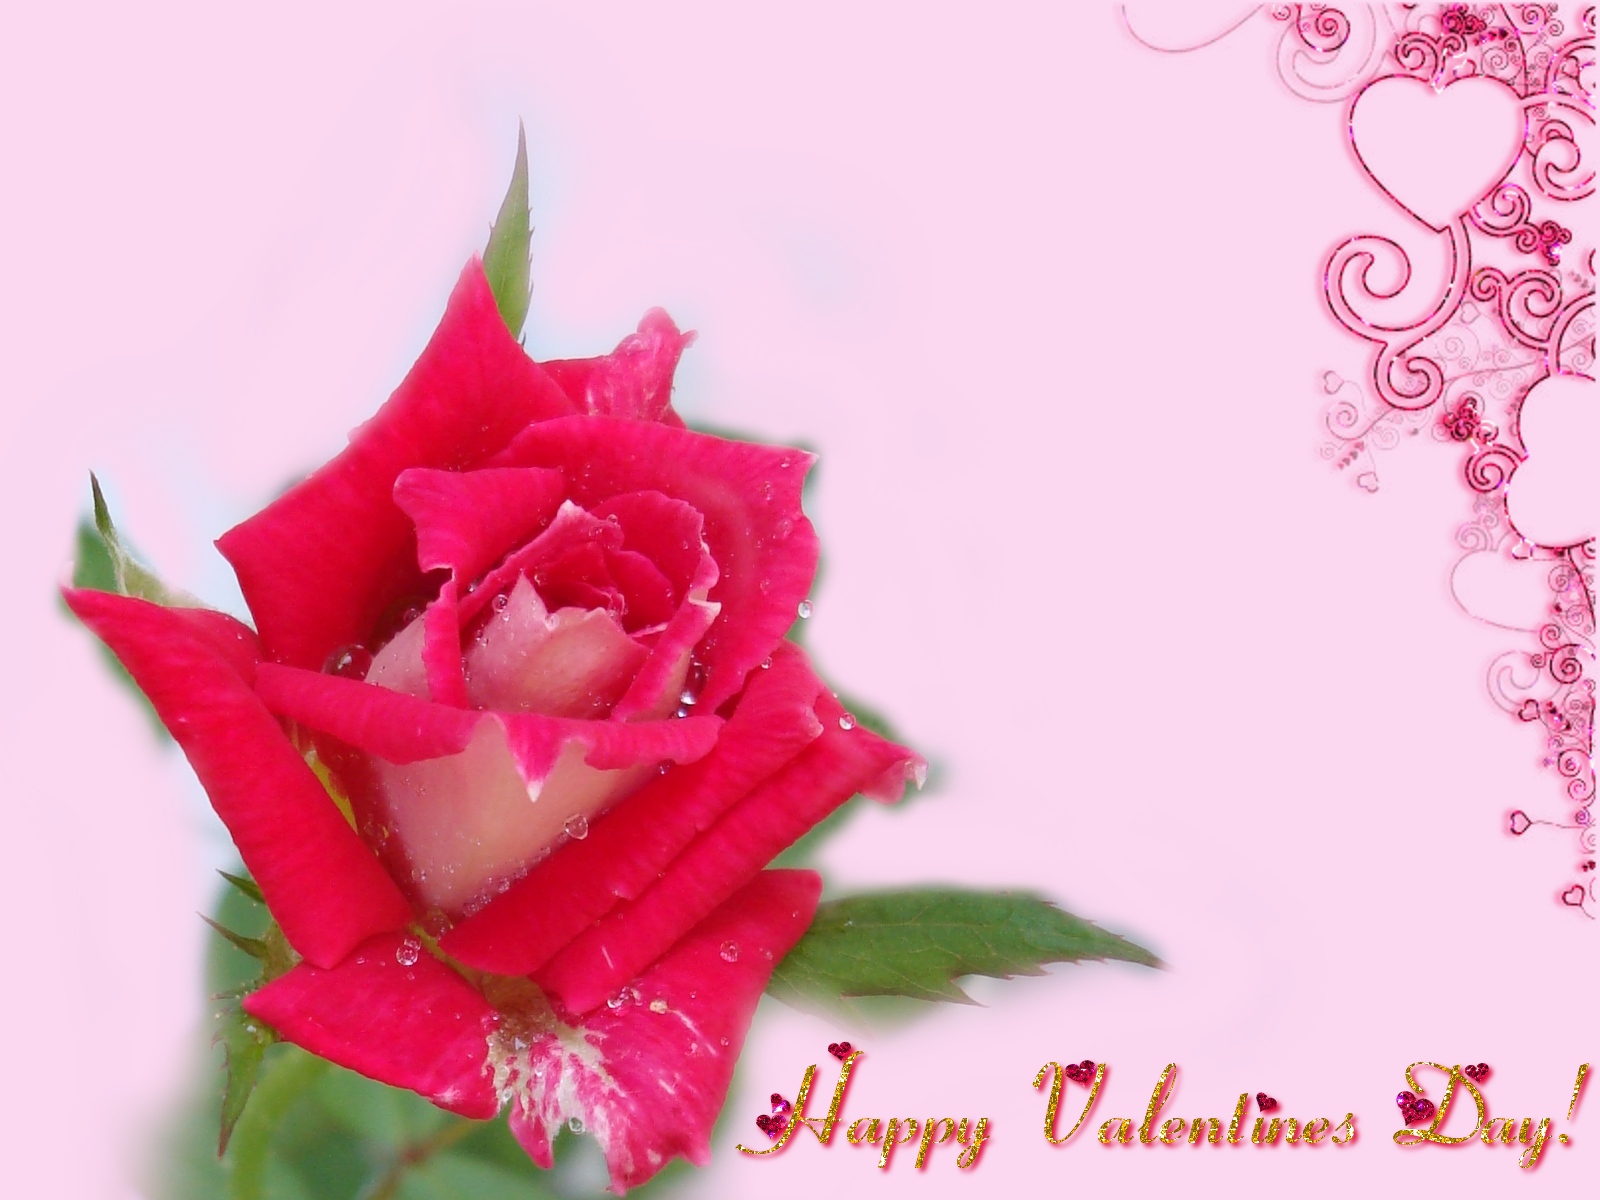 Happy Valentines Day Red Rose - Happy Valentines Day - HD Wallpaper 